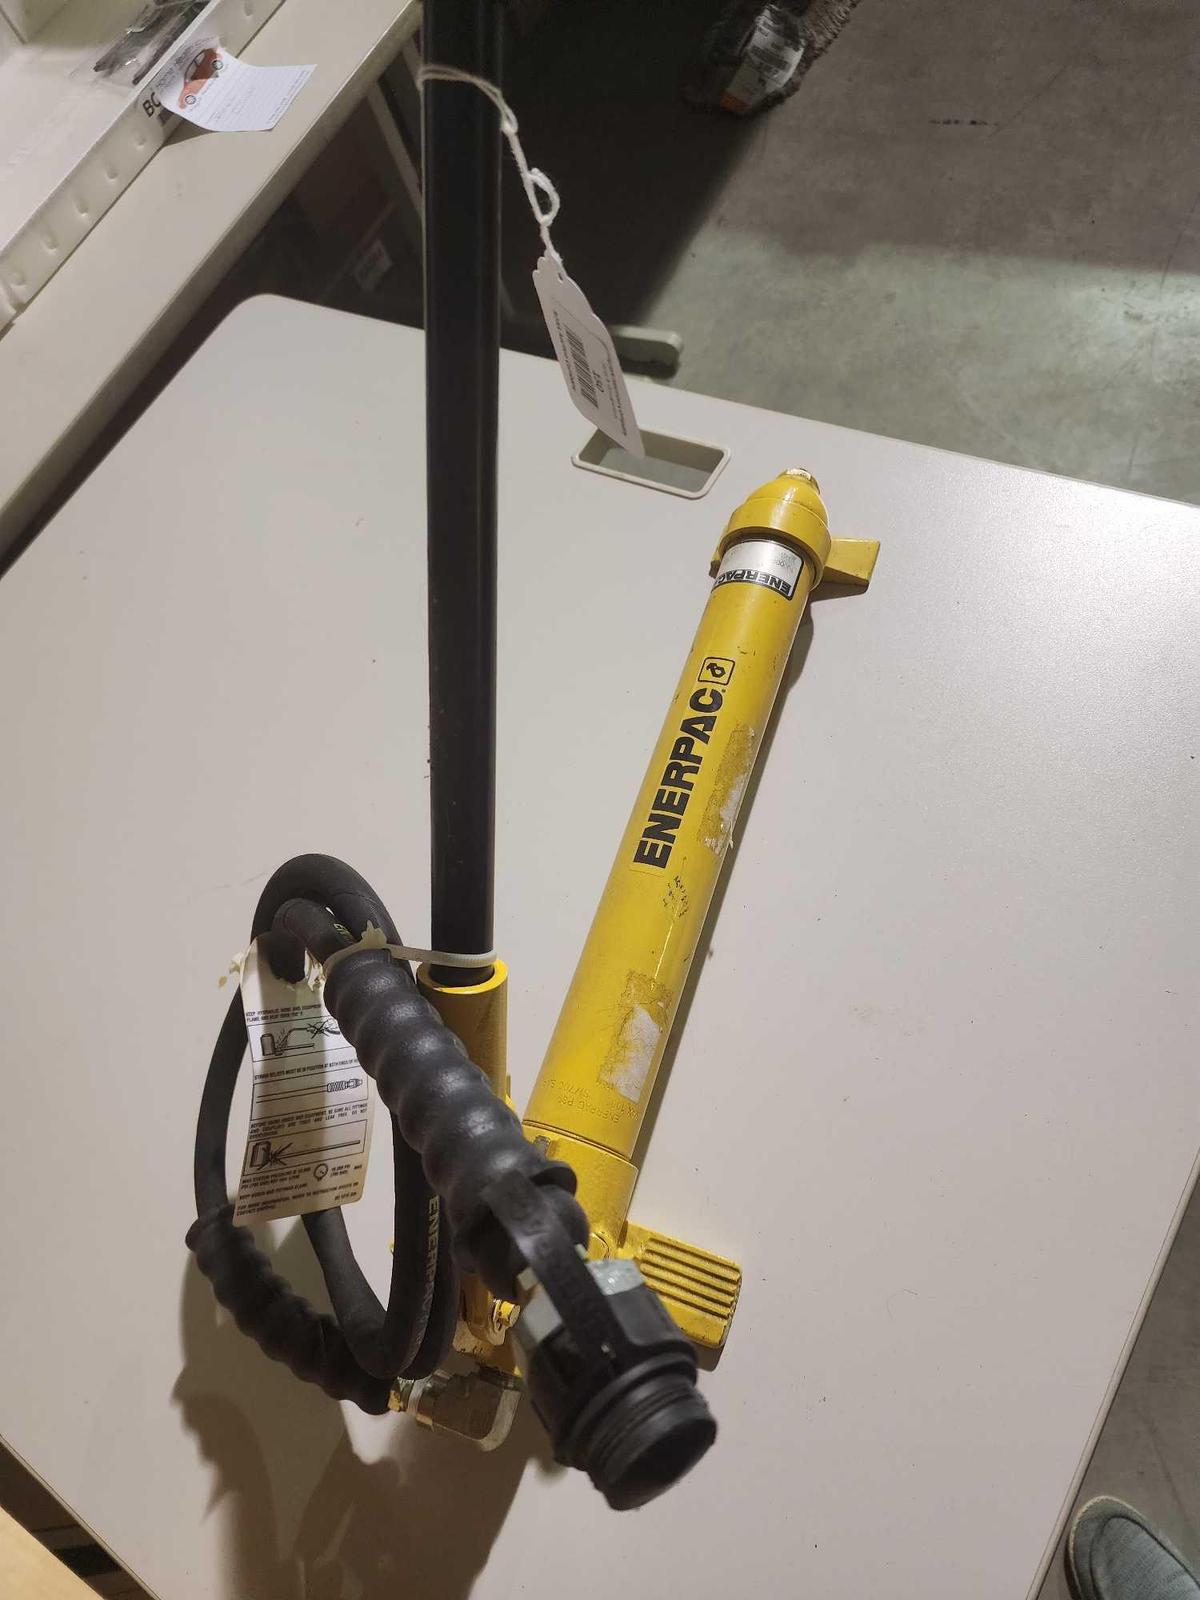 Enerpac hand hydraulic pump. Used in very good condition.